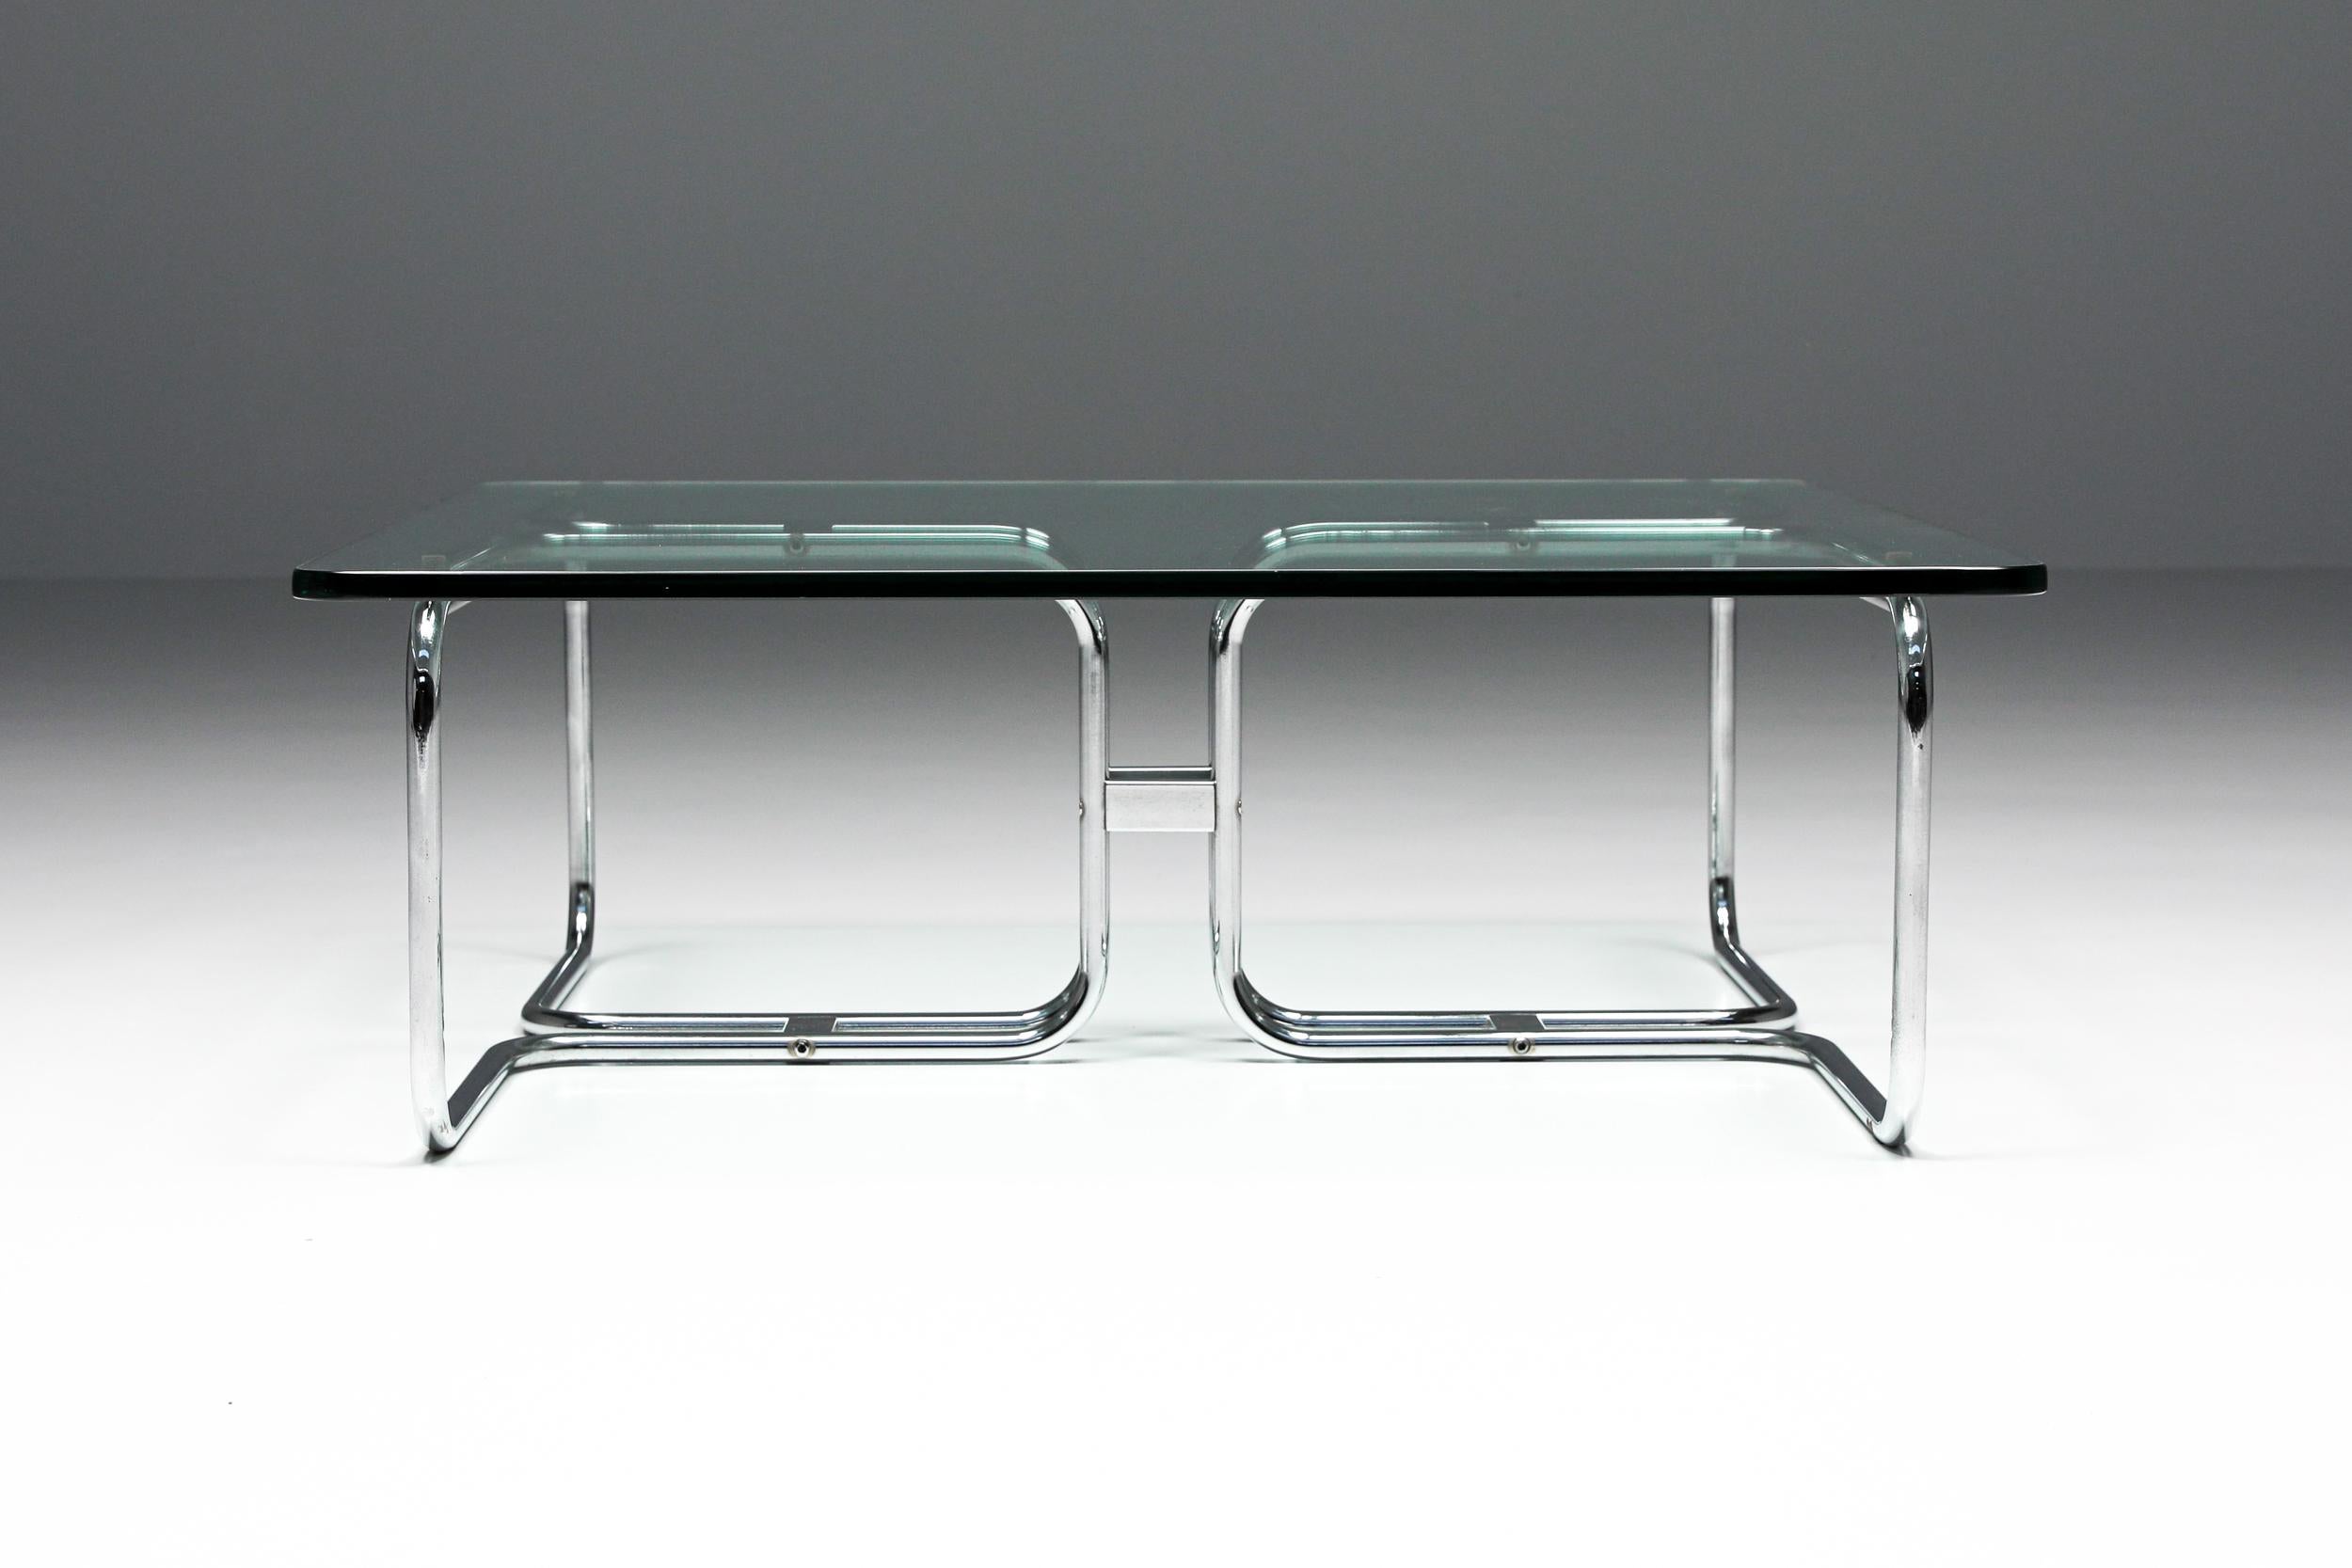 Mid-Century Modern Tucroma Coffee Table by Guido Faleschini for Pace Collection, Italian design